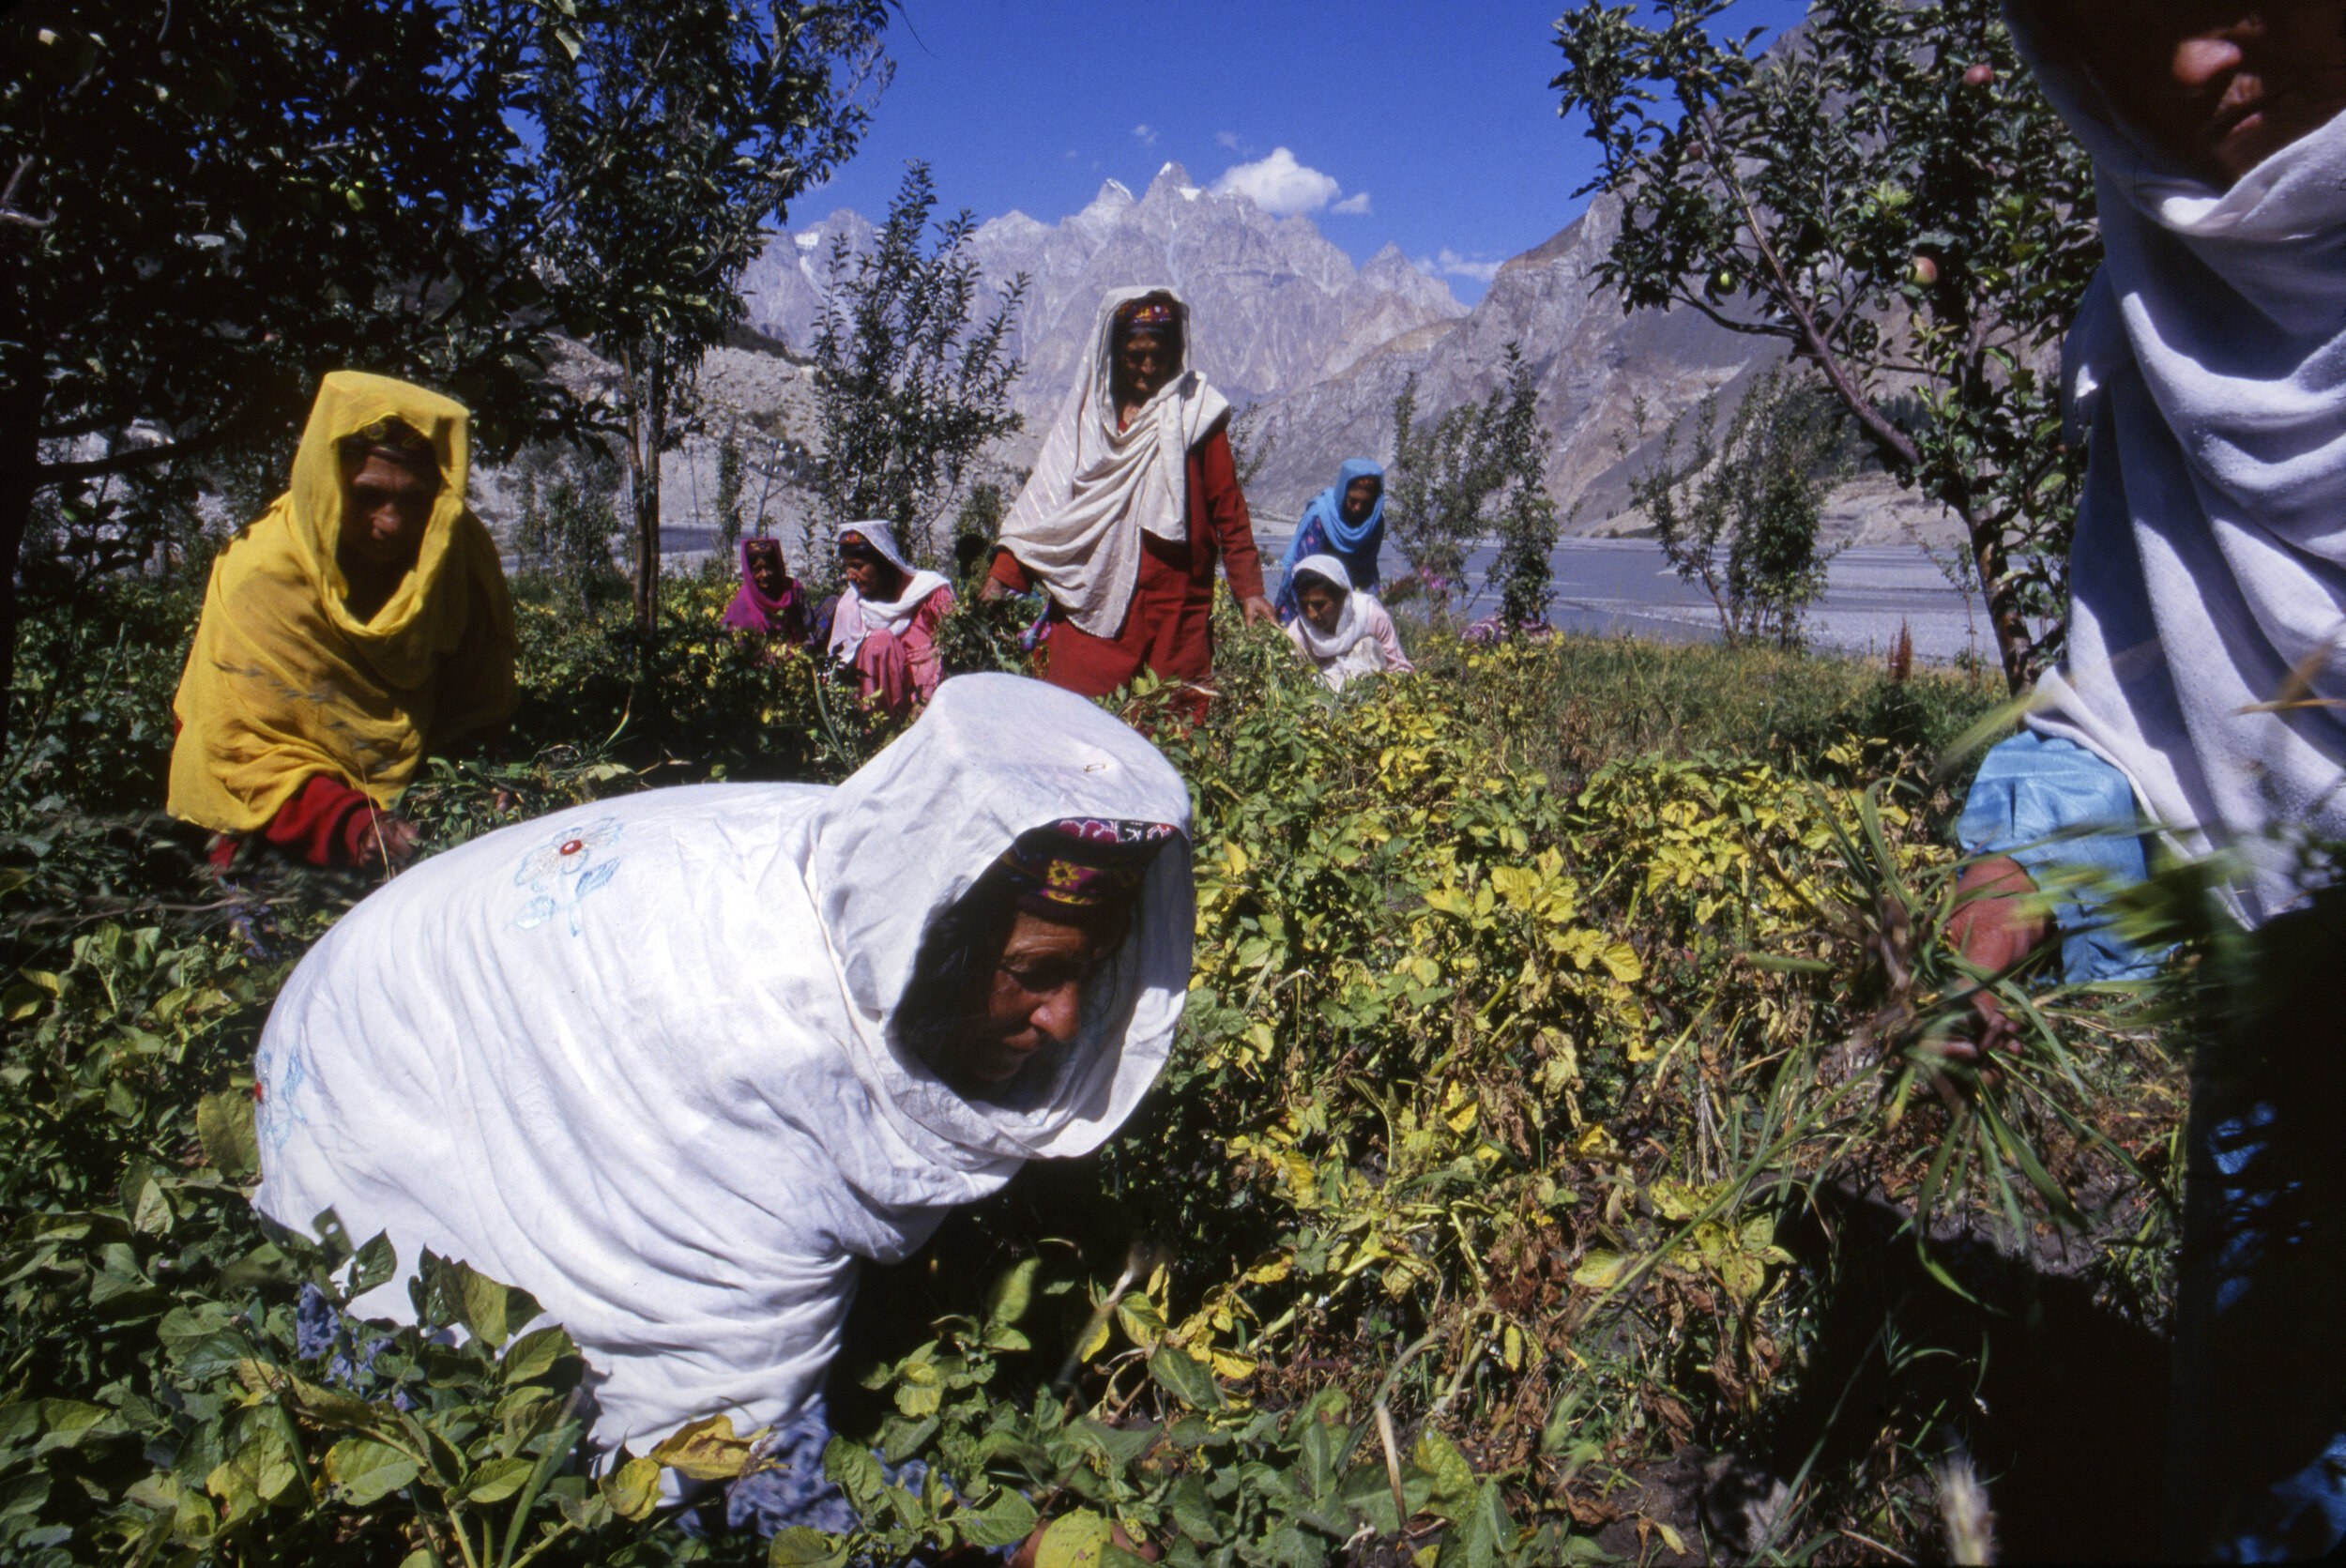  Women from the Women's Cooperative, started in 1984 to discuss local news and invest in village agricultural projects, tend to their orchards in Hunza Province, Pakistan. 1998 